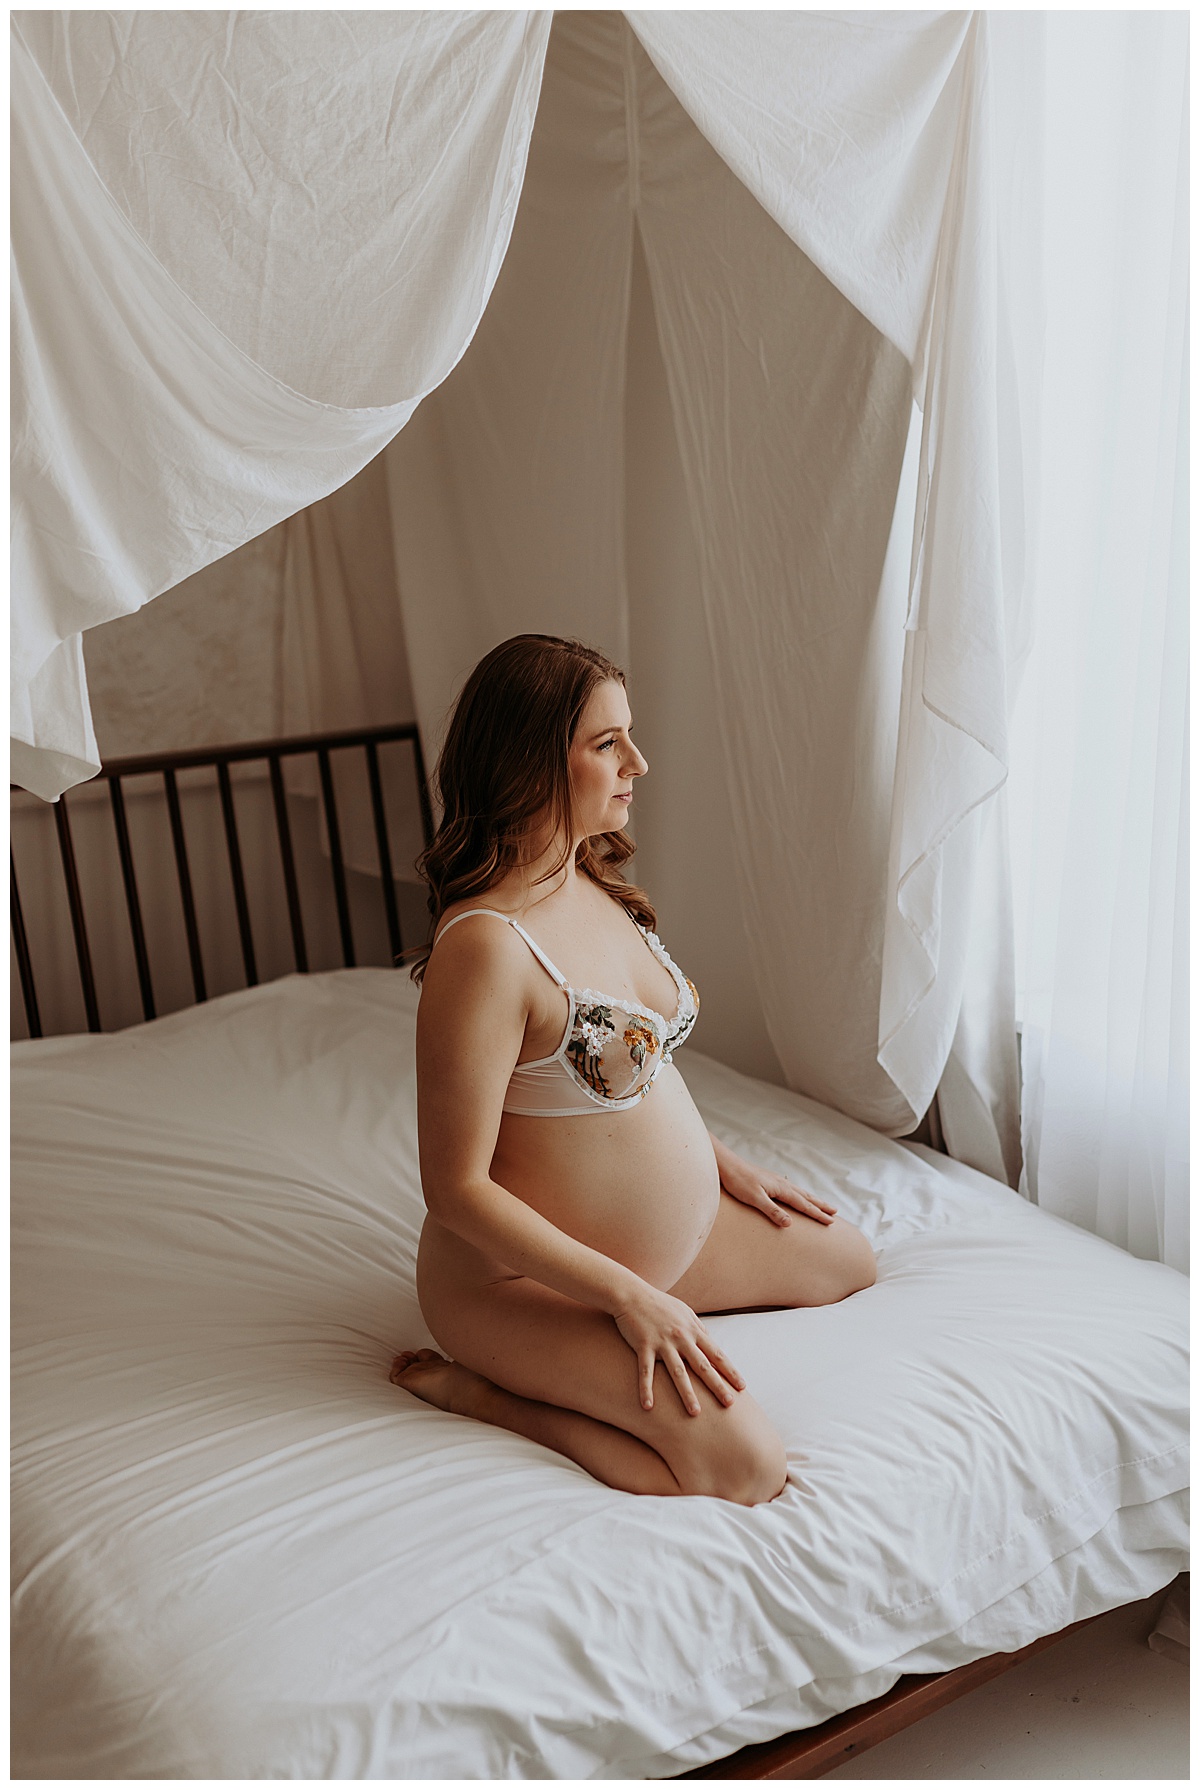 Mama sits on bed in white lingerie for Maternity Boudoir session